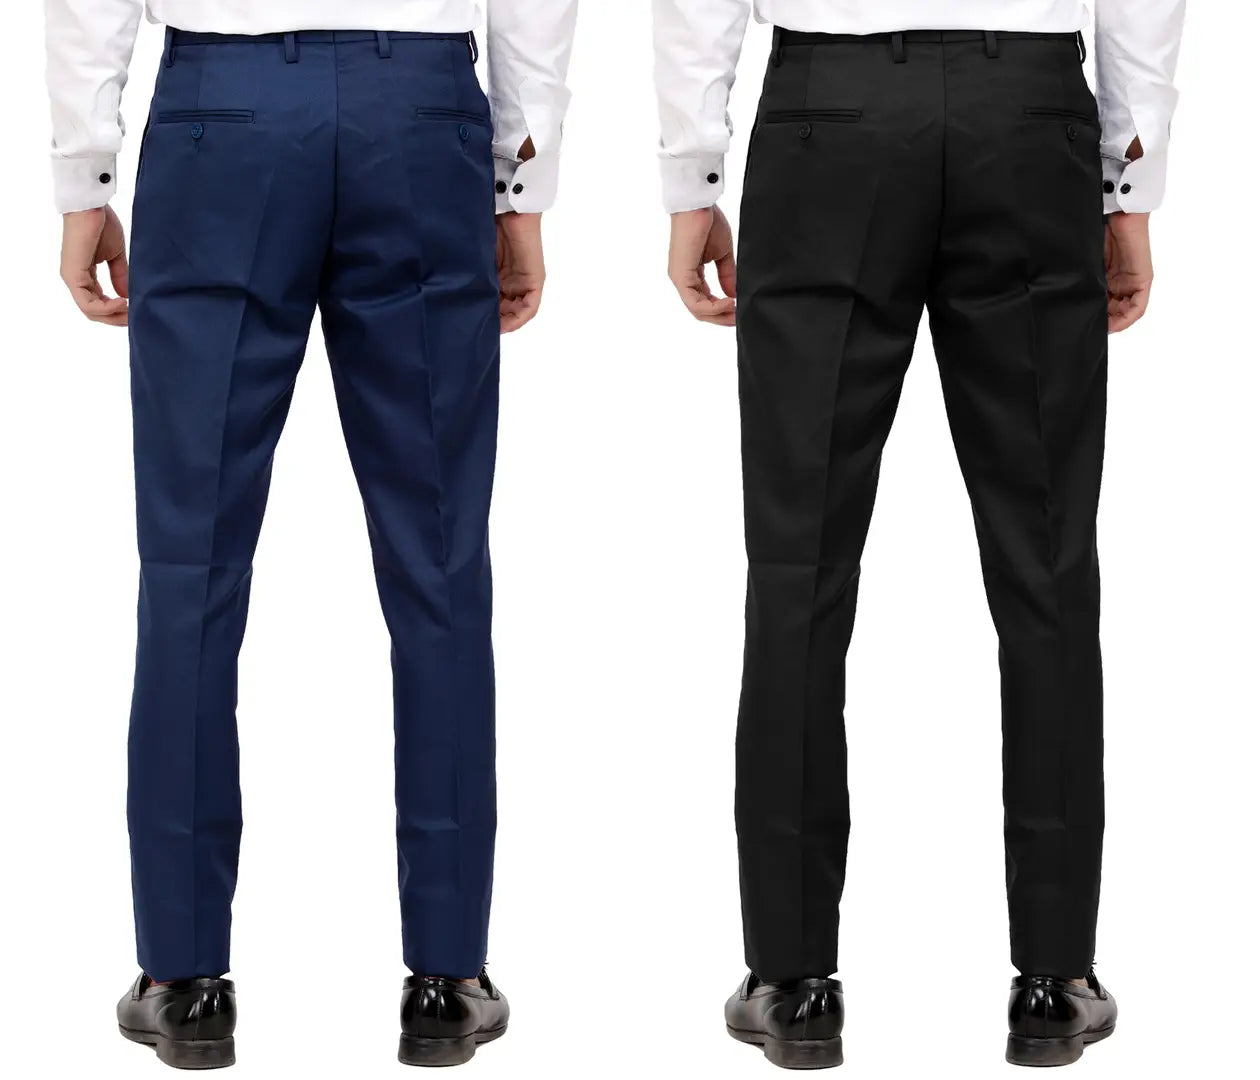 Kundan Men Poly-Viscose Blended Navy Blue and Black Formal Trousers ( Pack of 2 Trousers )